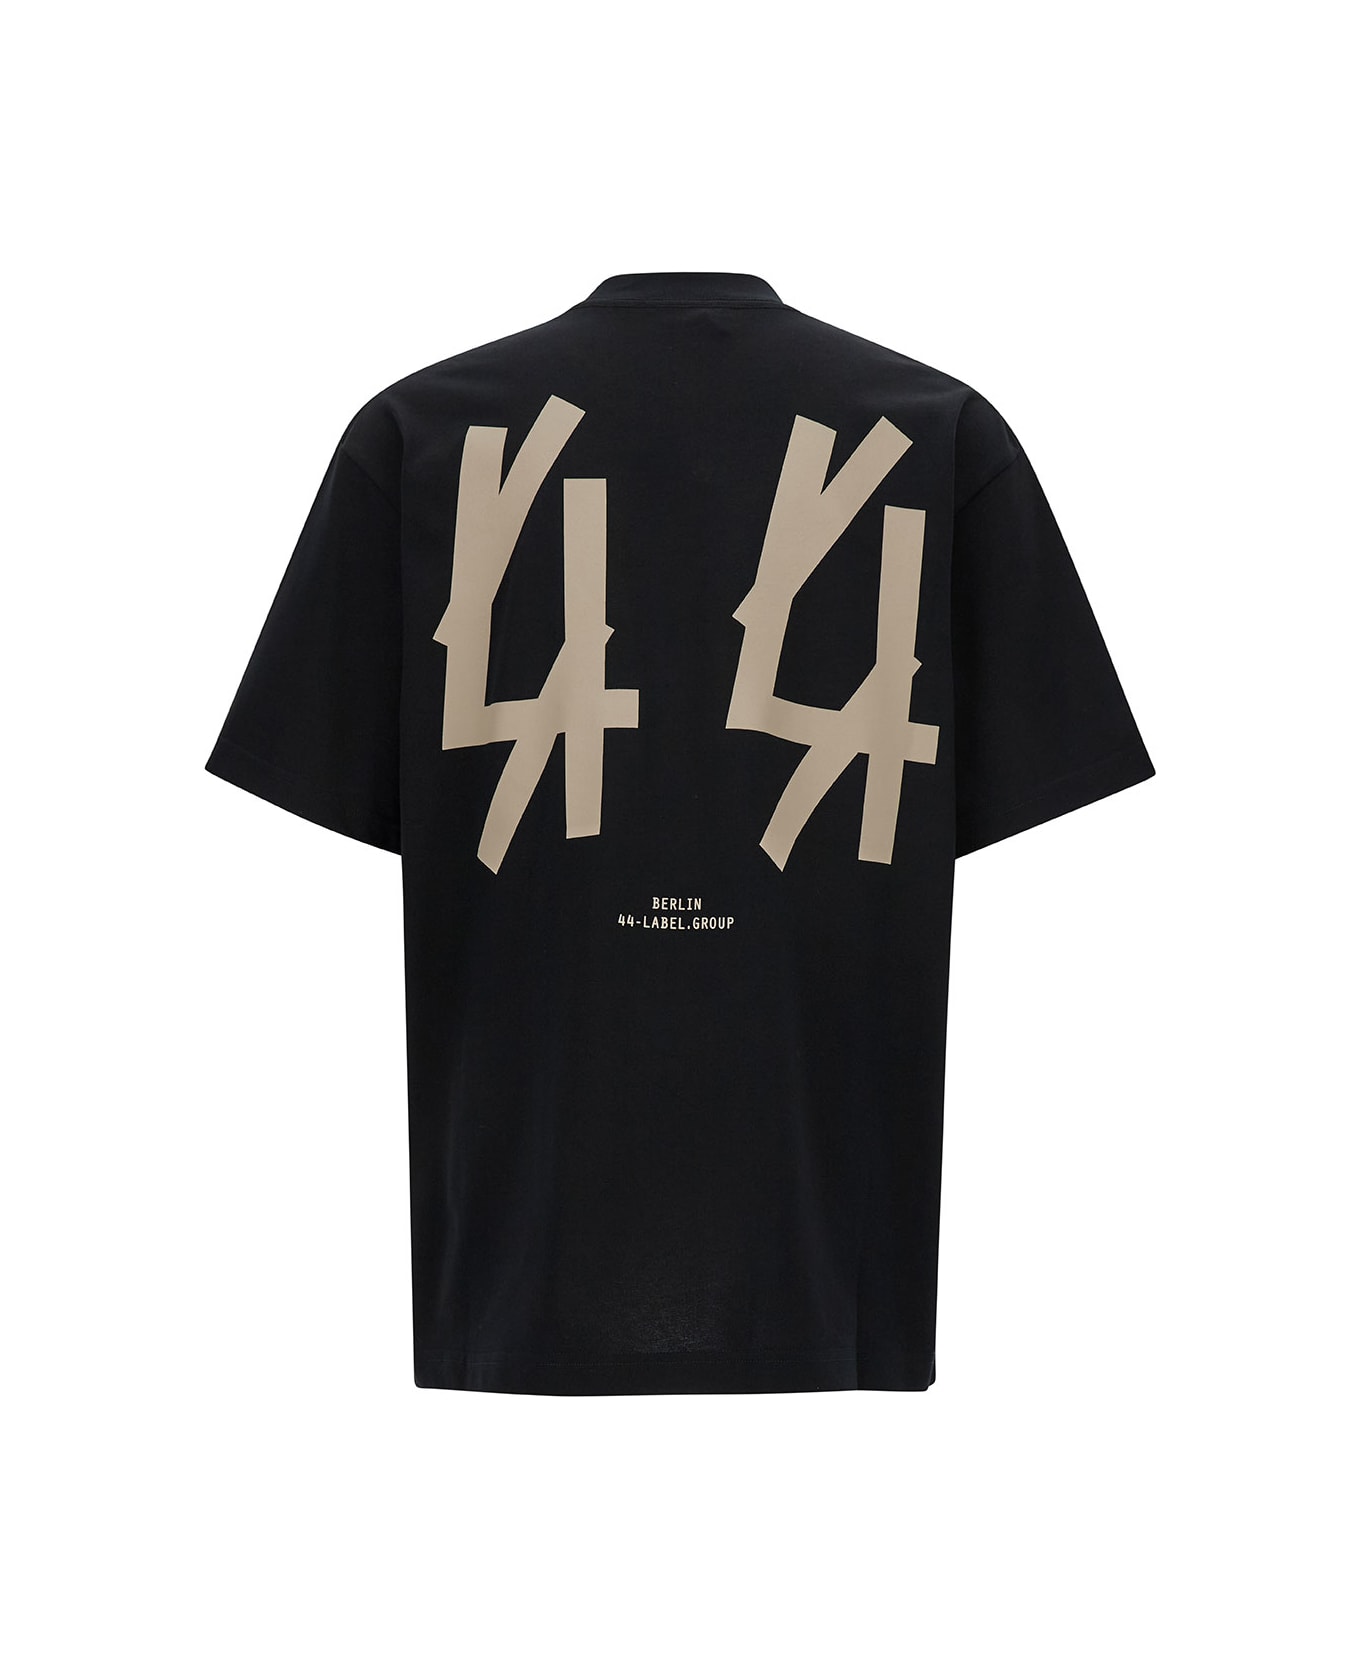 44 Label Group Black T-shirt With Logo Embroidery And Print In Cotton Man - Nero